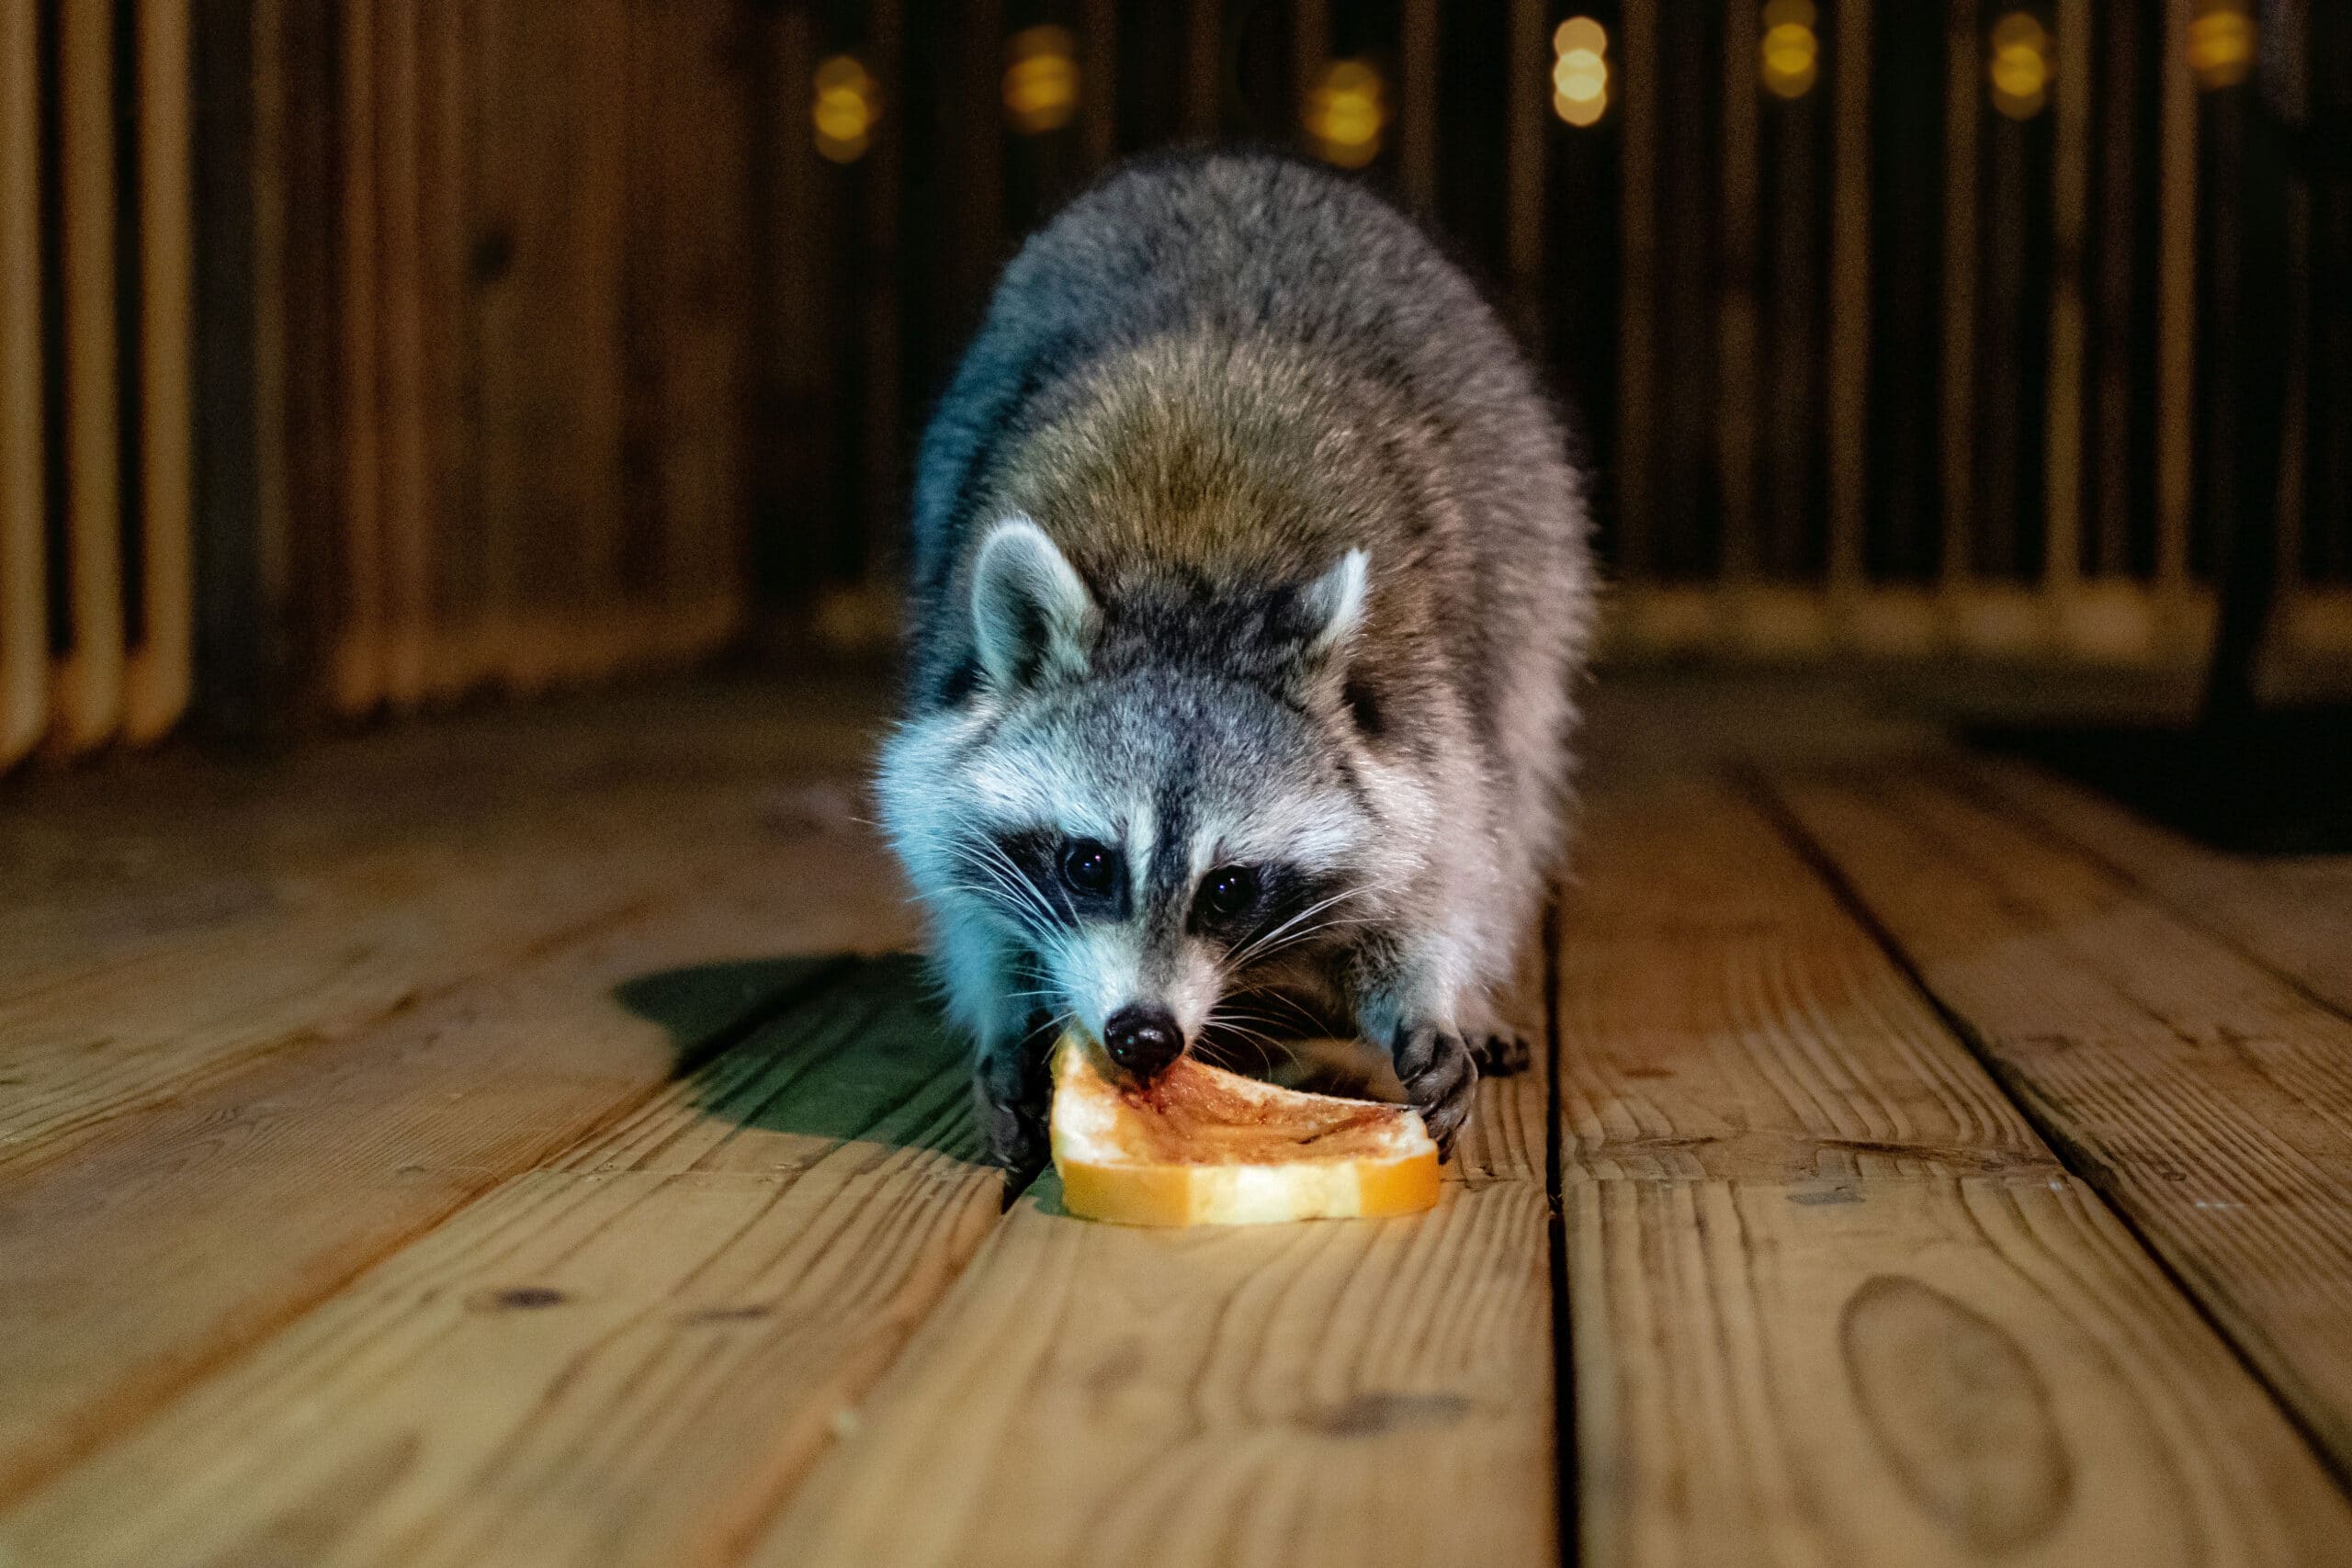 How to Get Rid of Raccoons